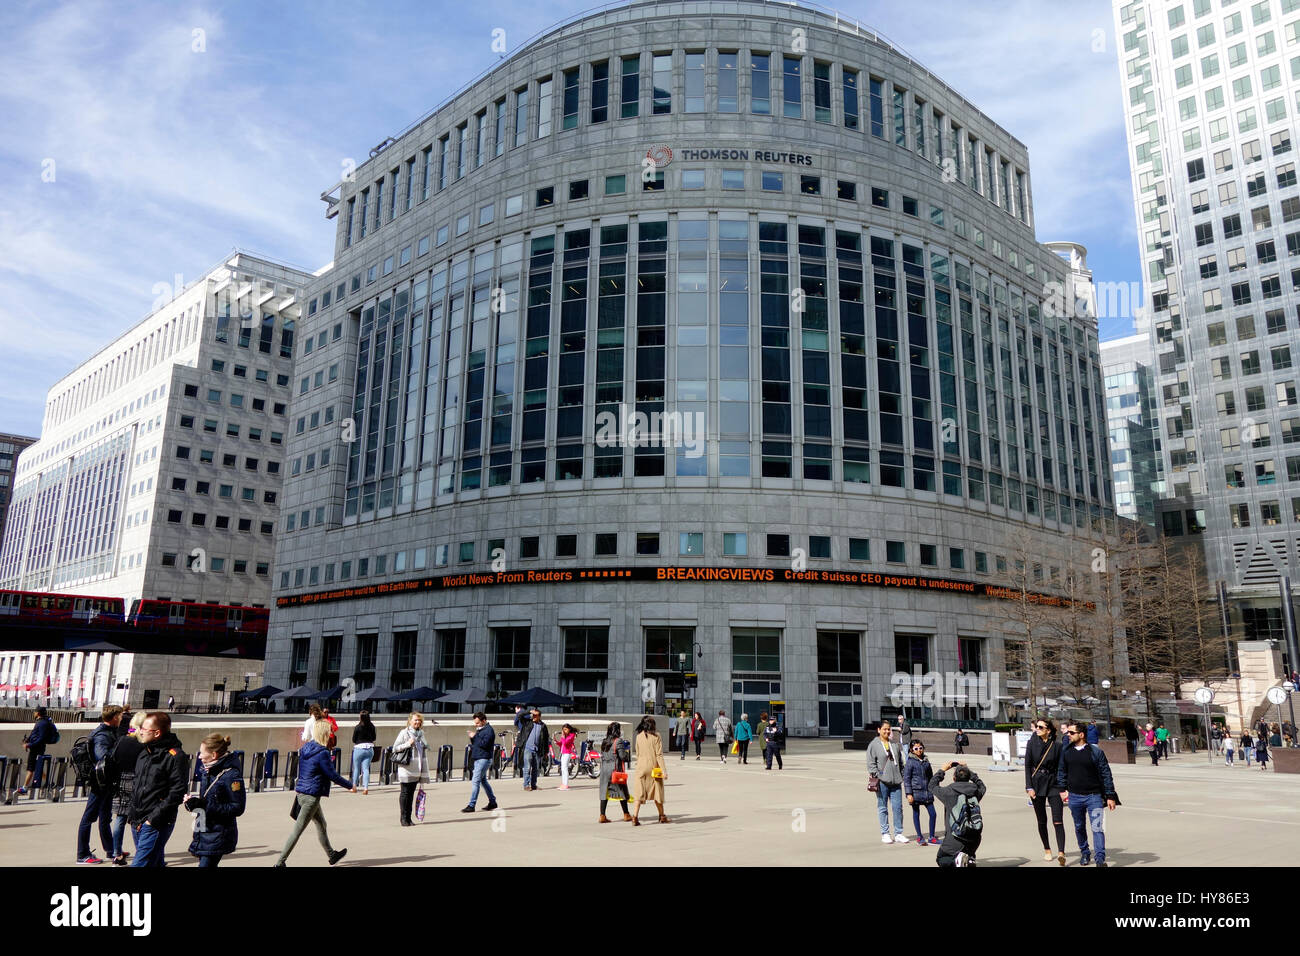 Thomson Reuters Building in Canary Wharf, London Stock Photo